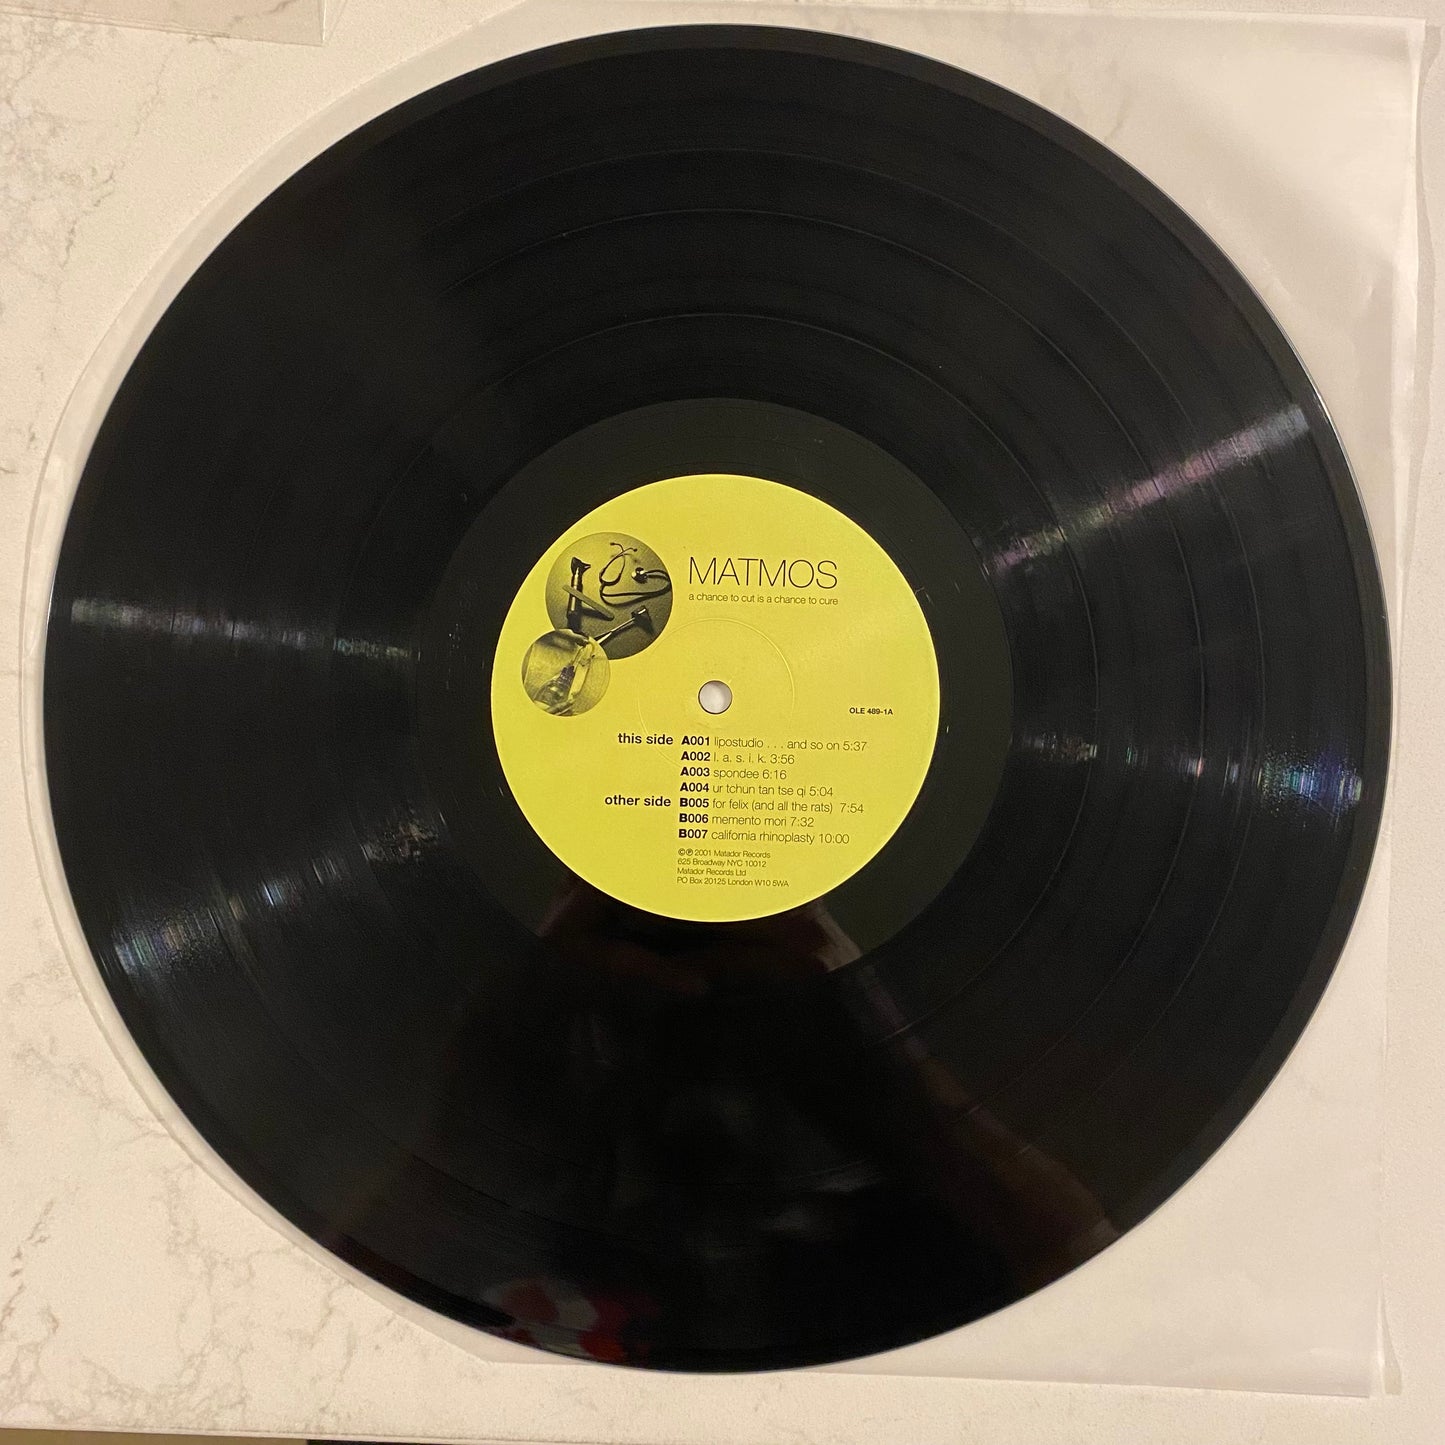 Matmos - A Chance To Cut Is A Chance To Cure (LP, Album, 150)